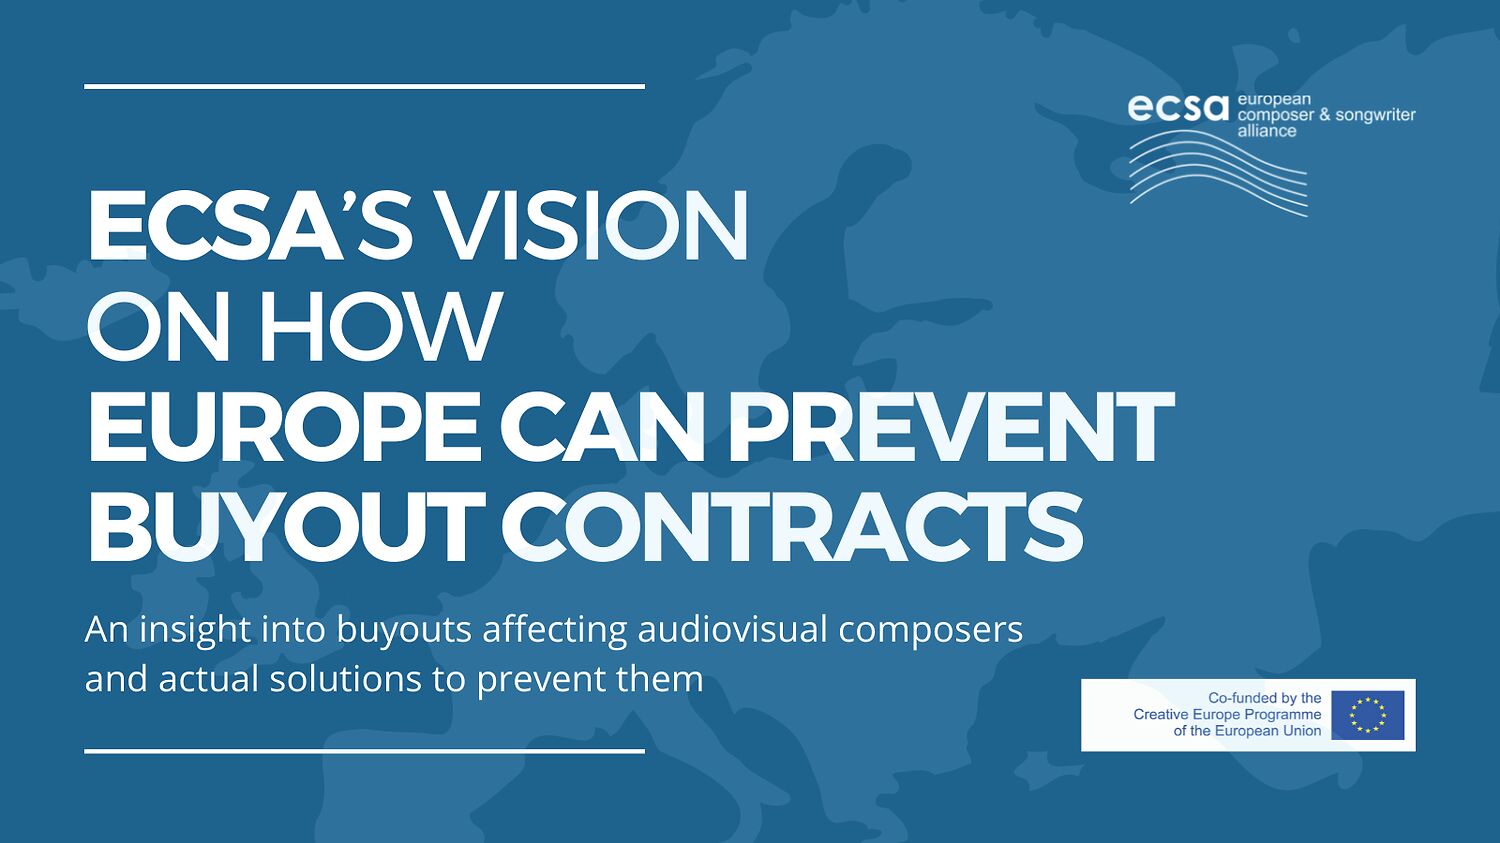 ECSA’s Vision on how Europe can prevent buyout contracts